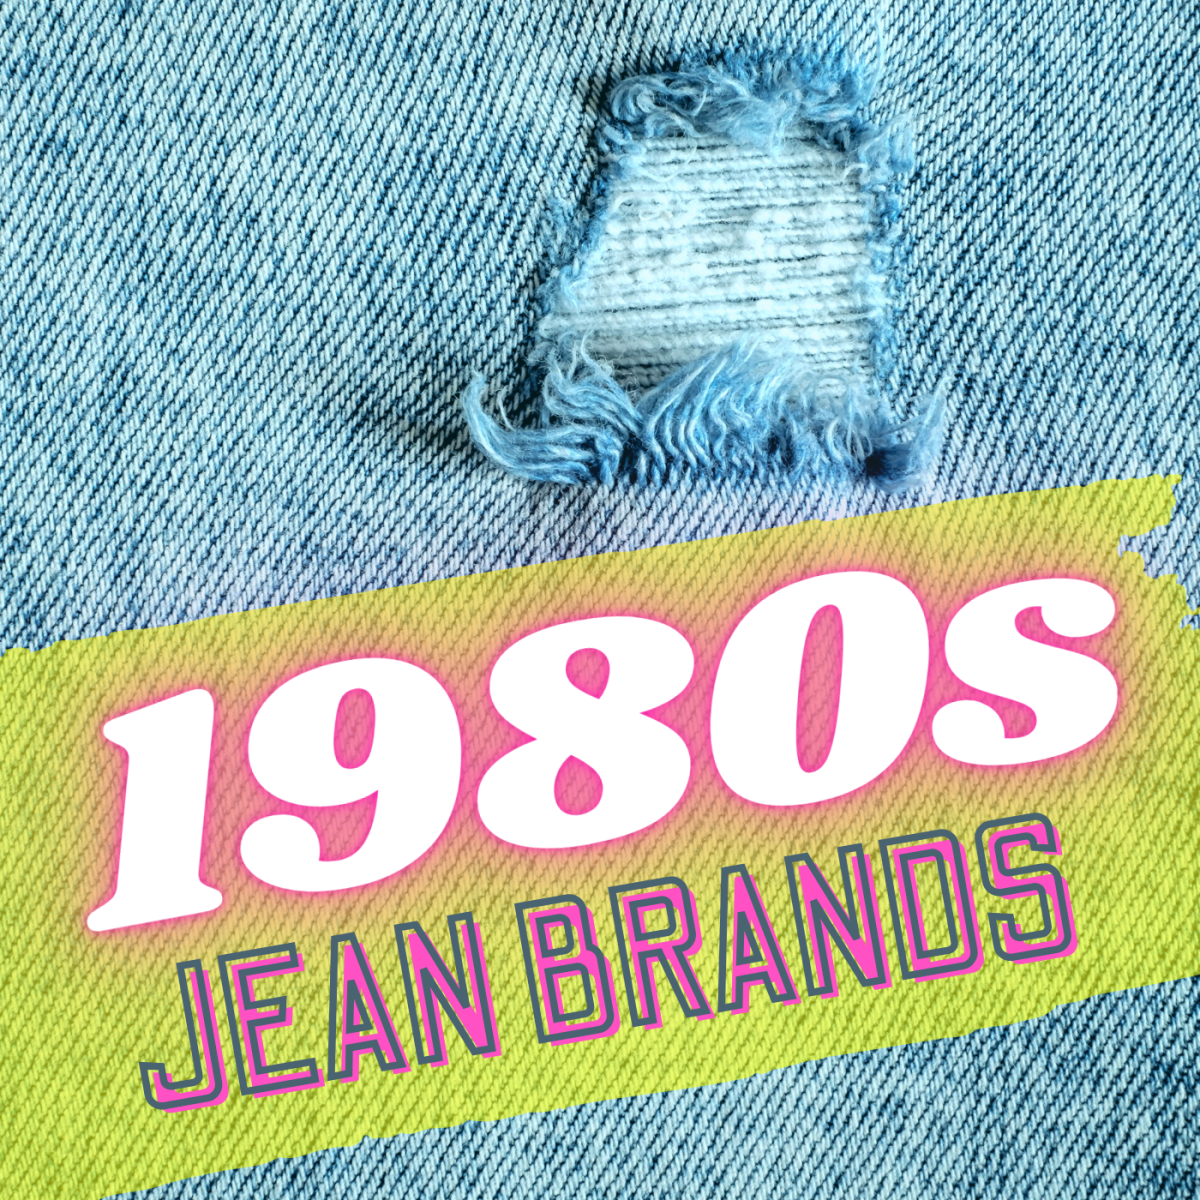 List of Name-Brand Blue Jeans From the '80s